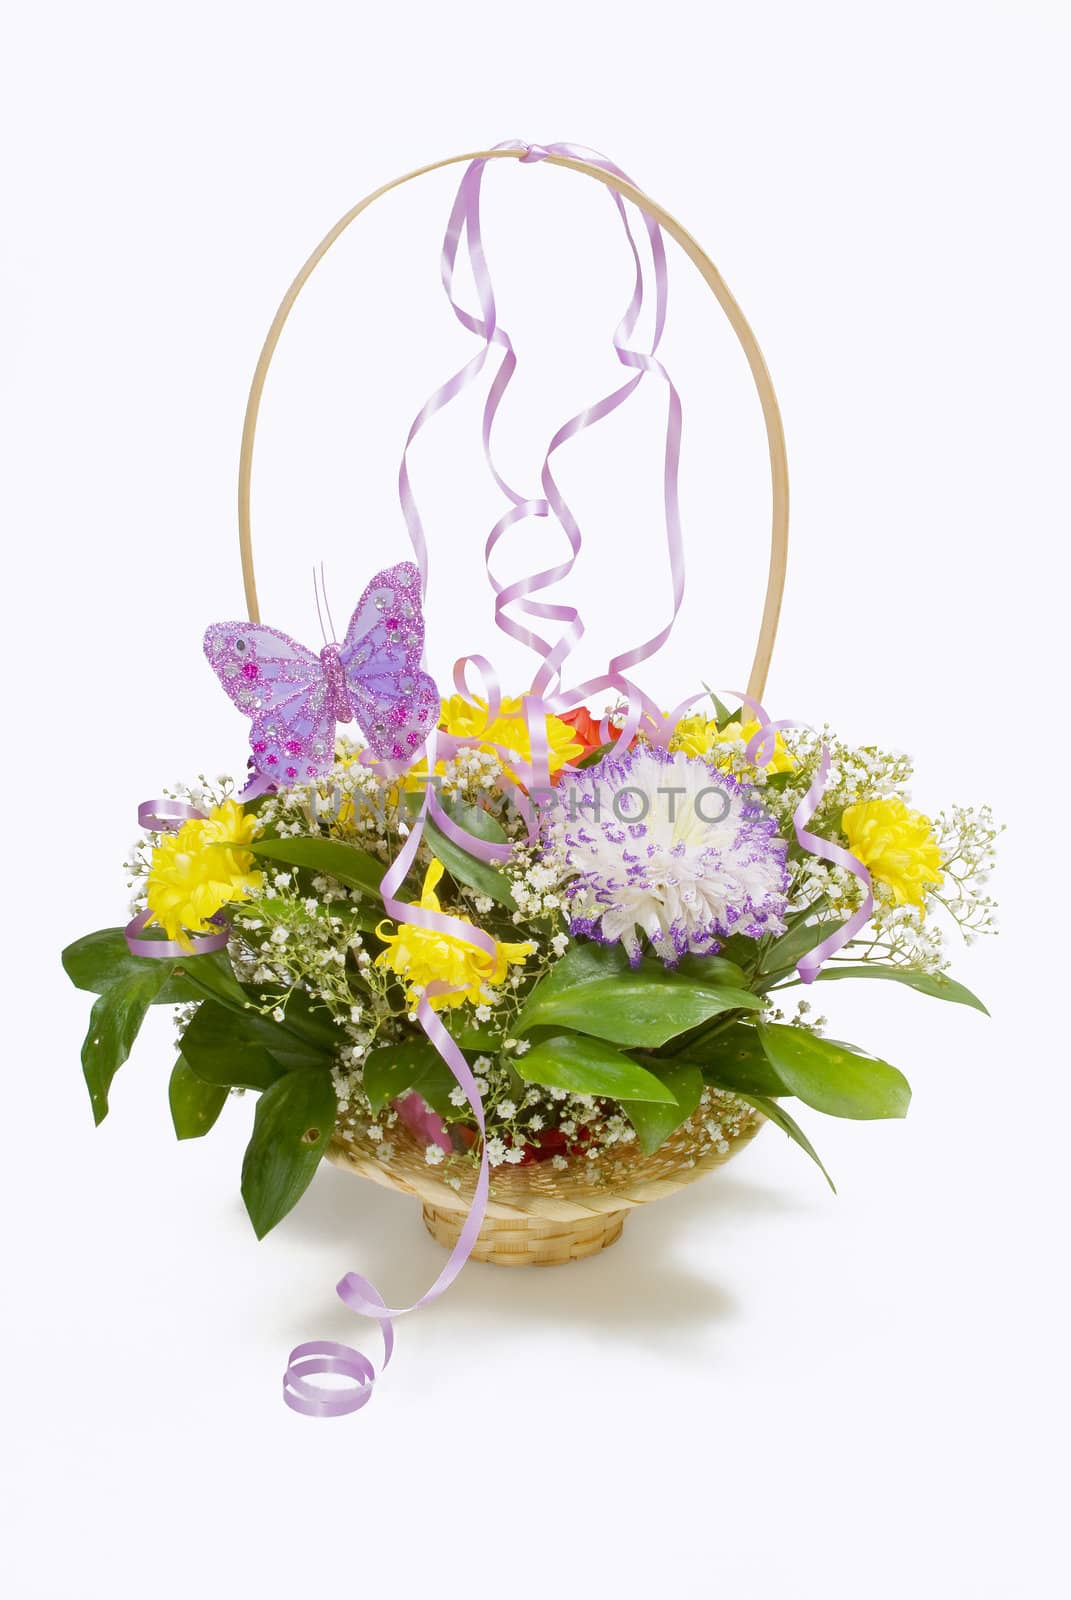 Basket of flowers with a butterfly and ribbons